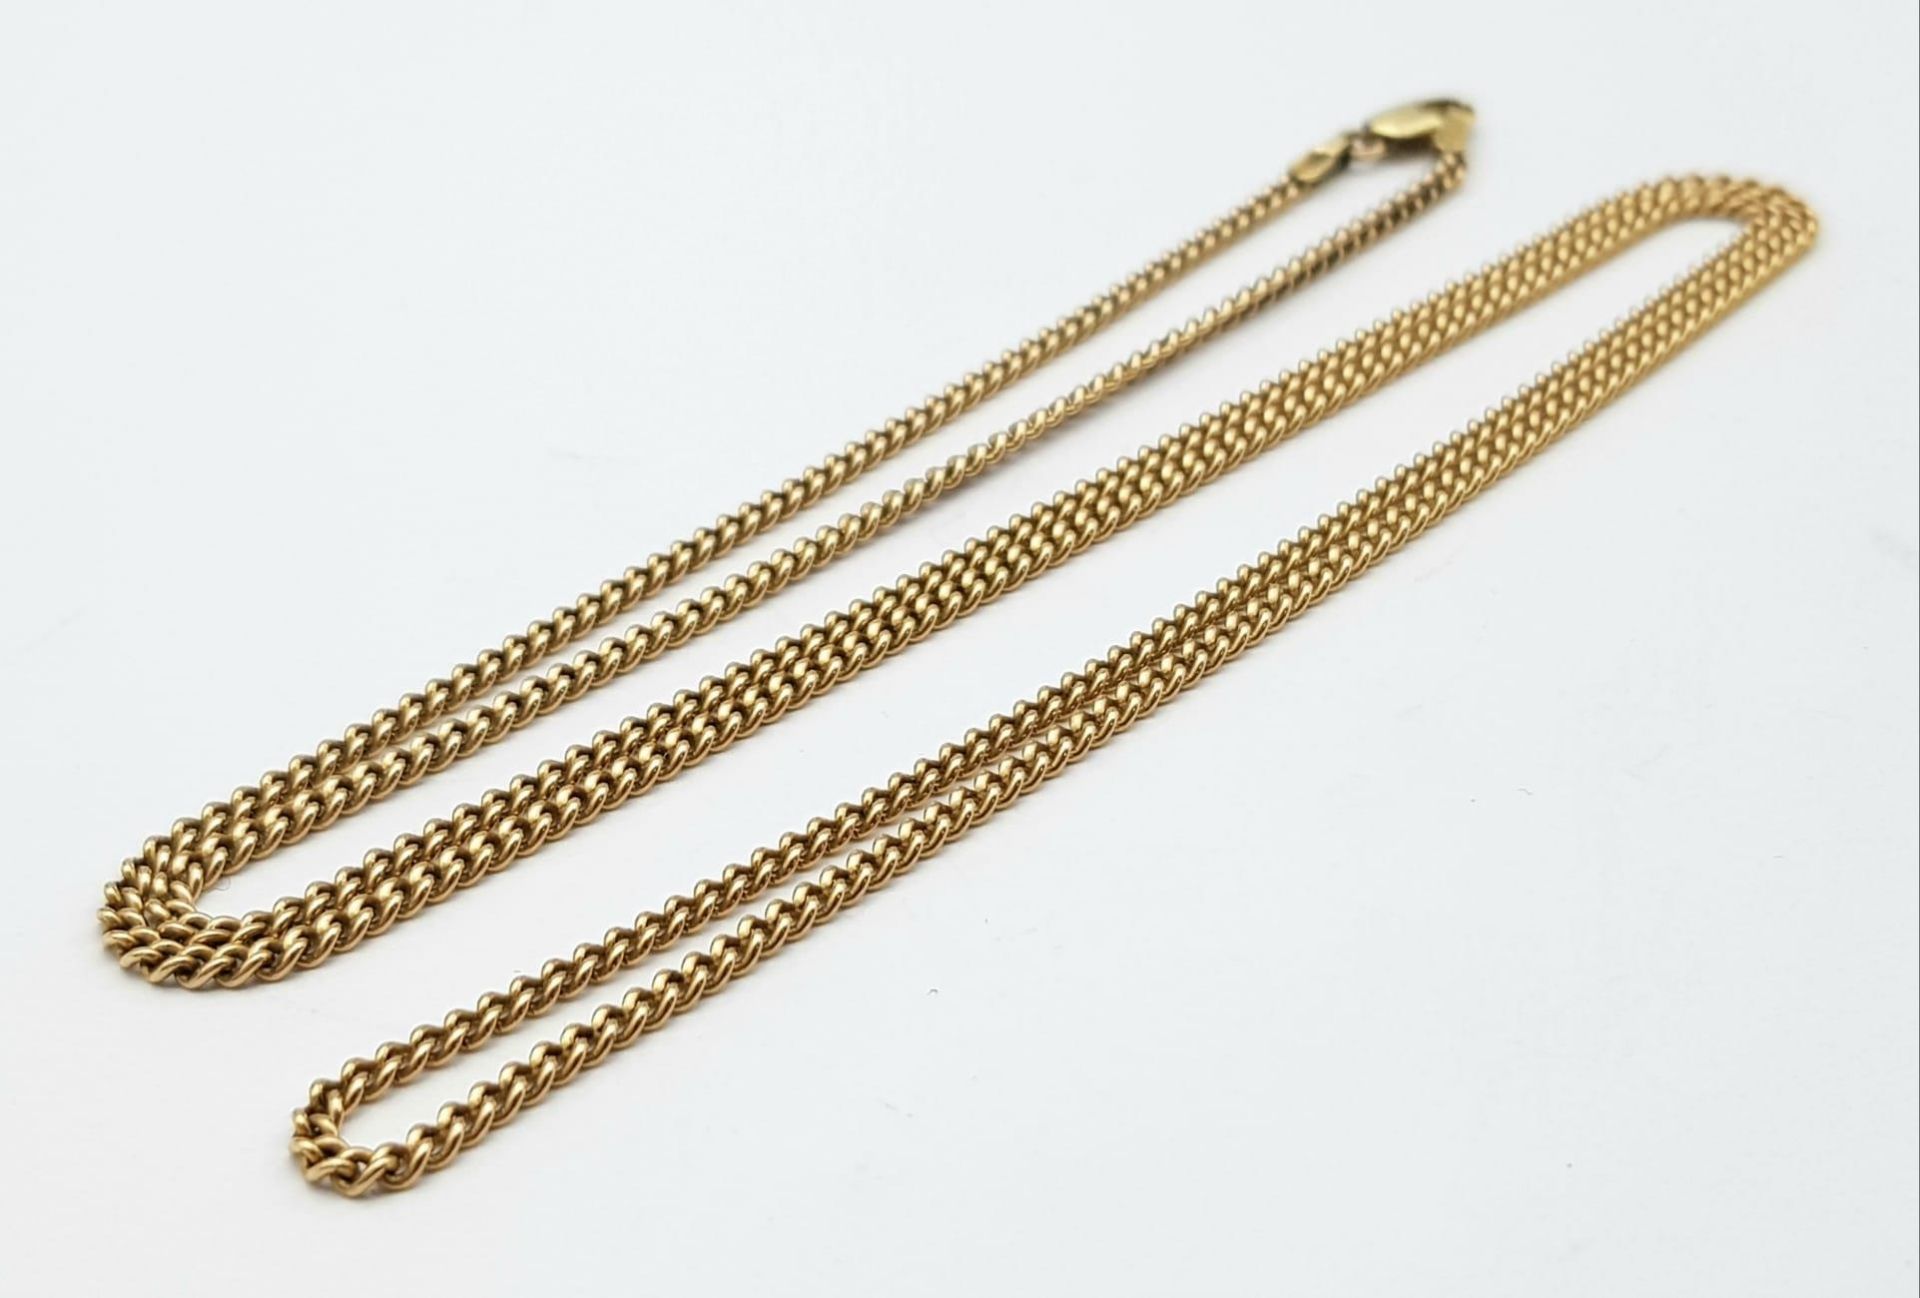 A Vintage 9K Yellow Gold Small Curb Link Chain/Necklace. 64cm length. 8.25g weight. - Image 2 of 4